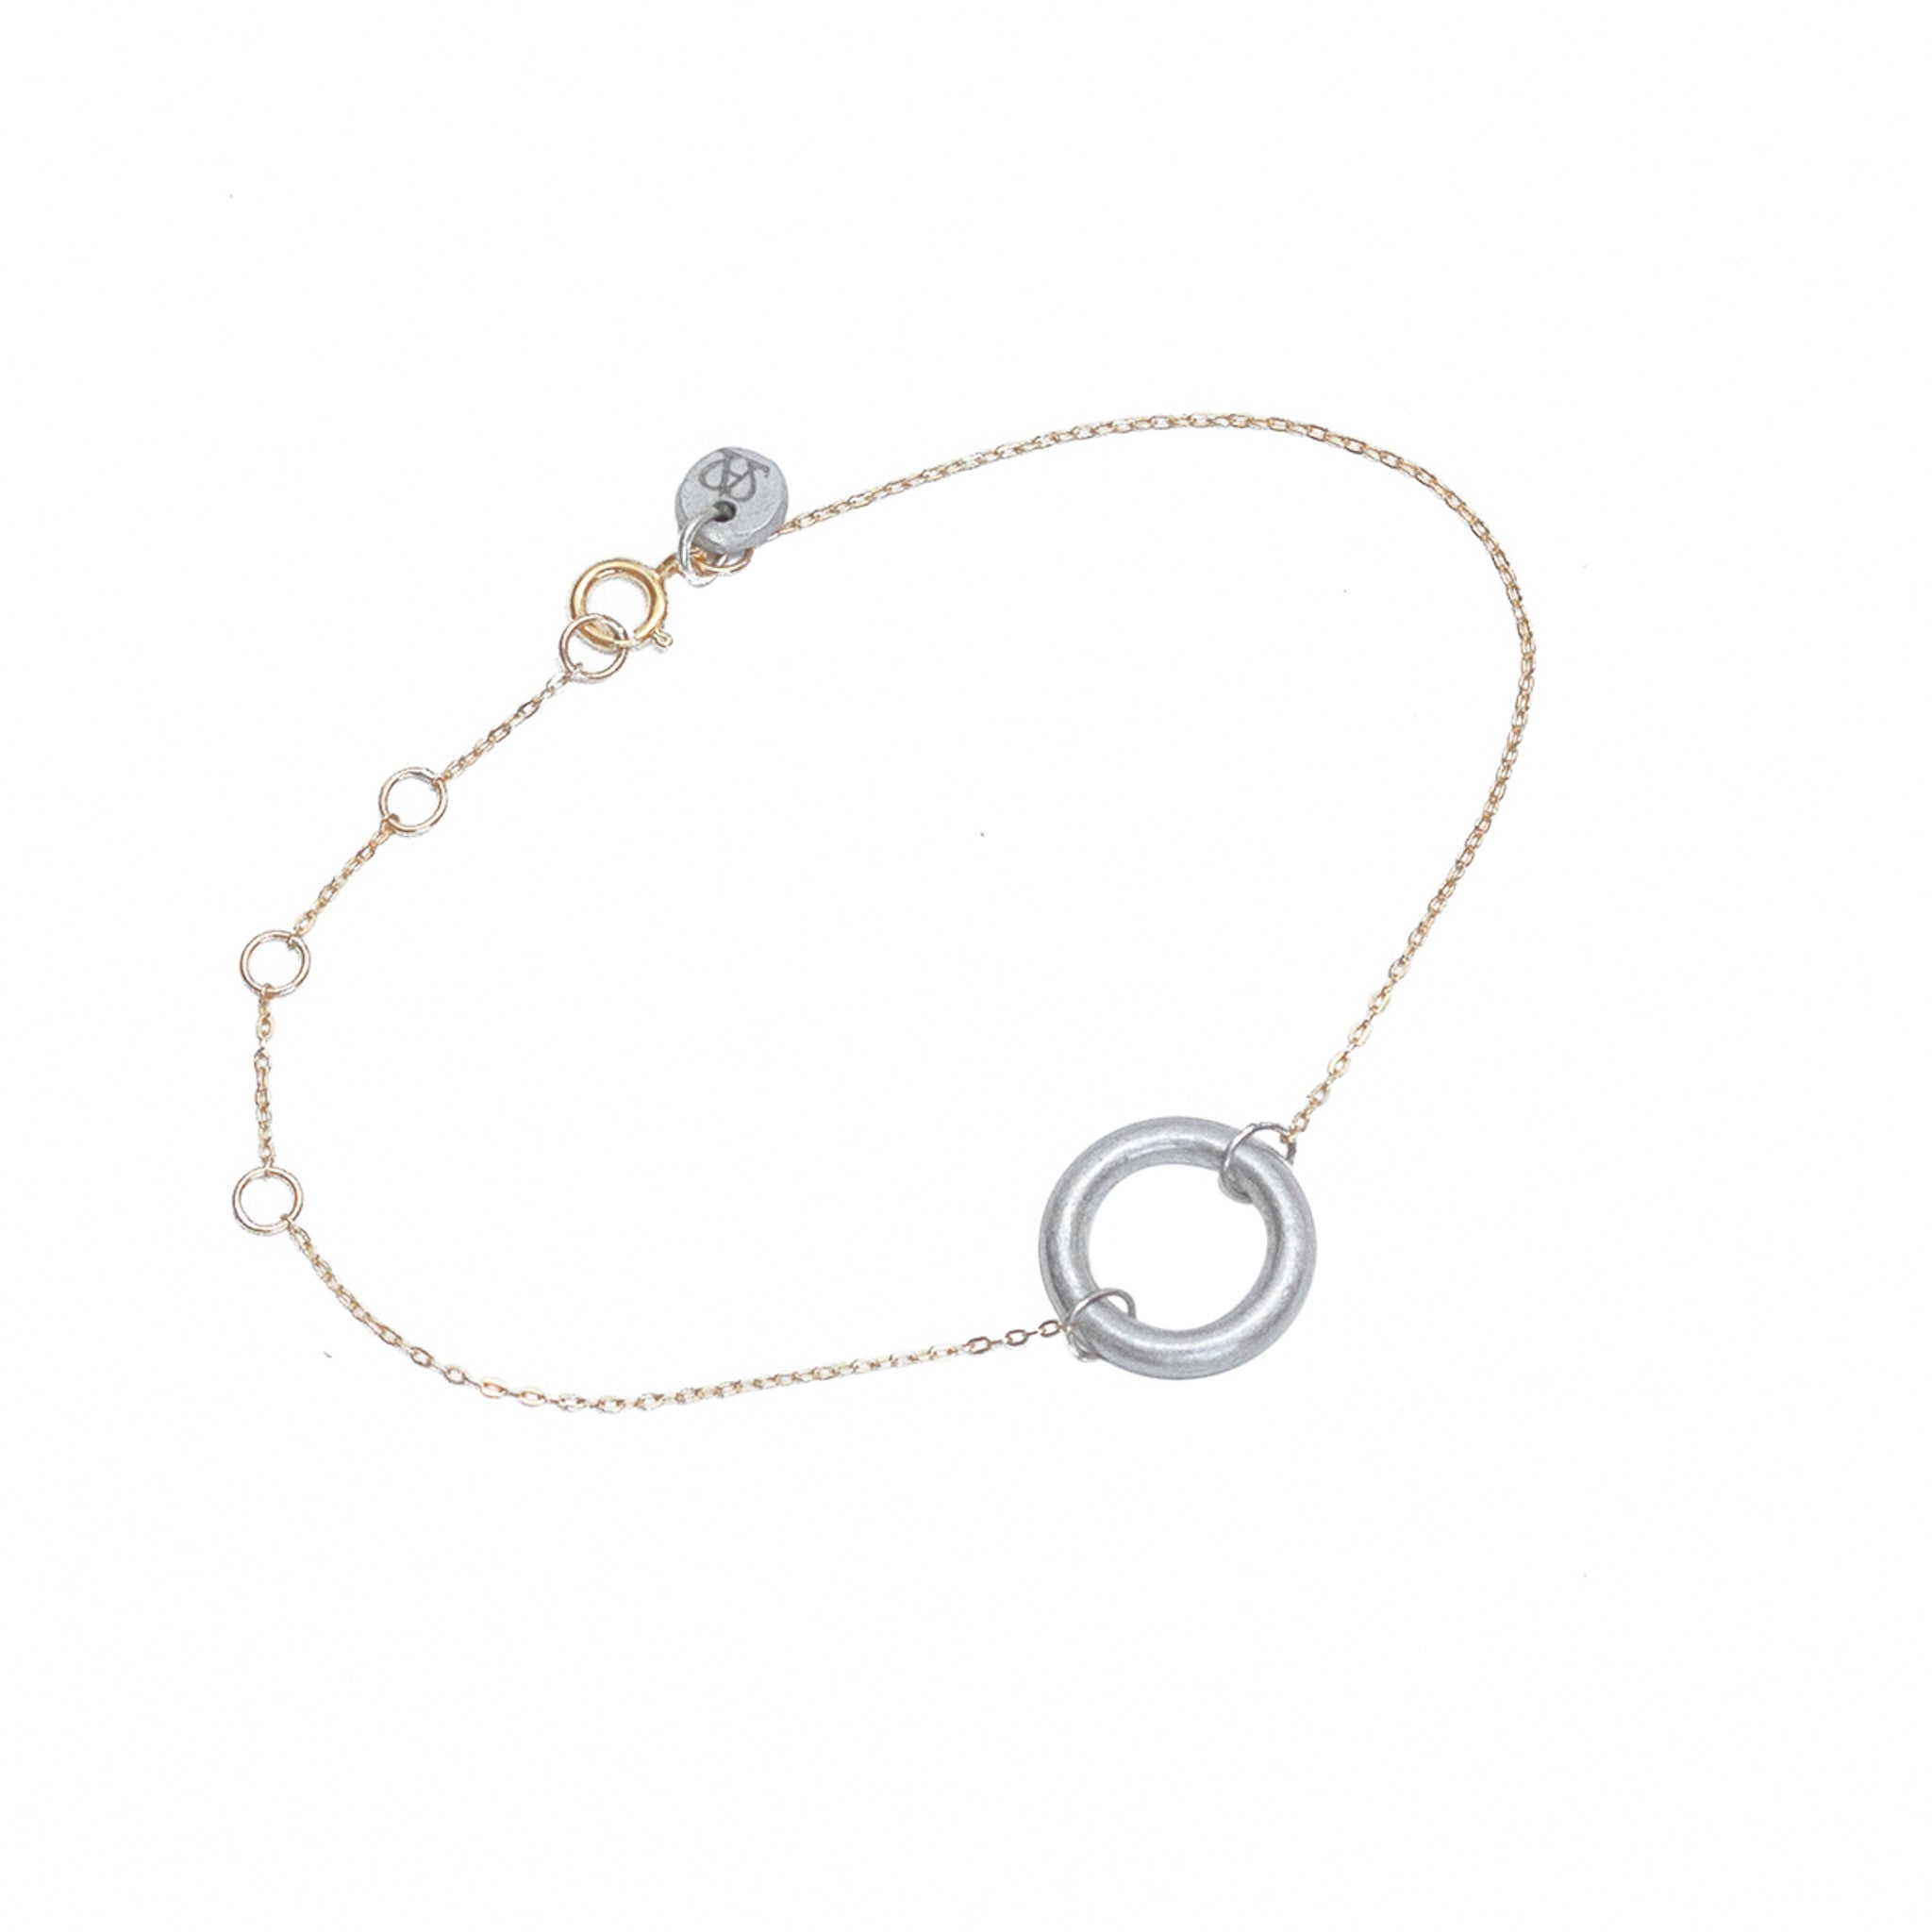 ARTICLE22 Virtuous Full Circle Bracelet - Sustainable Jewelry with a Positive Impact